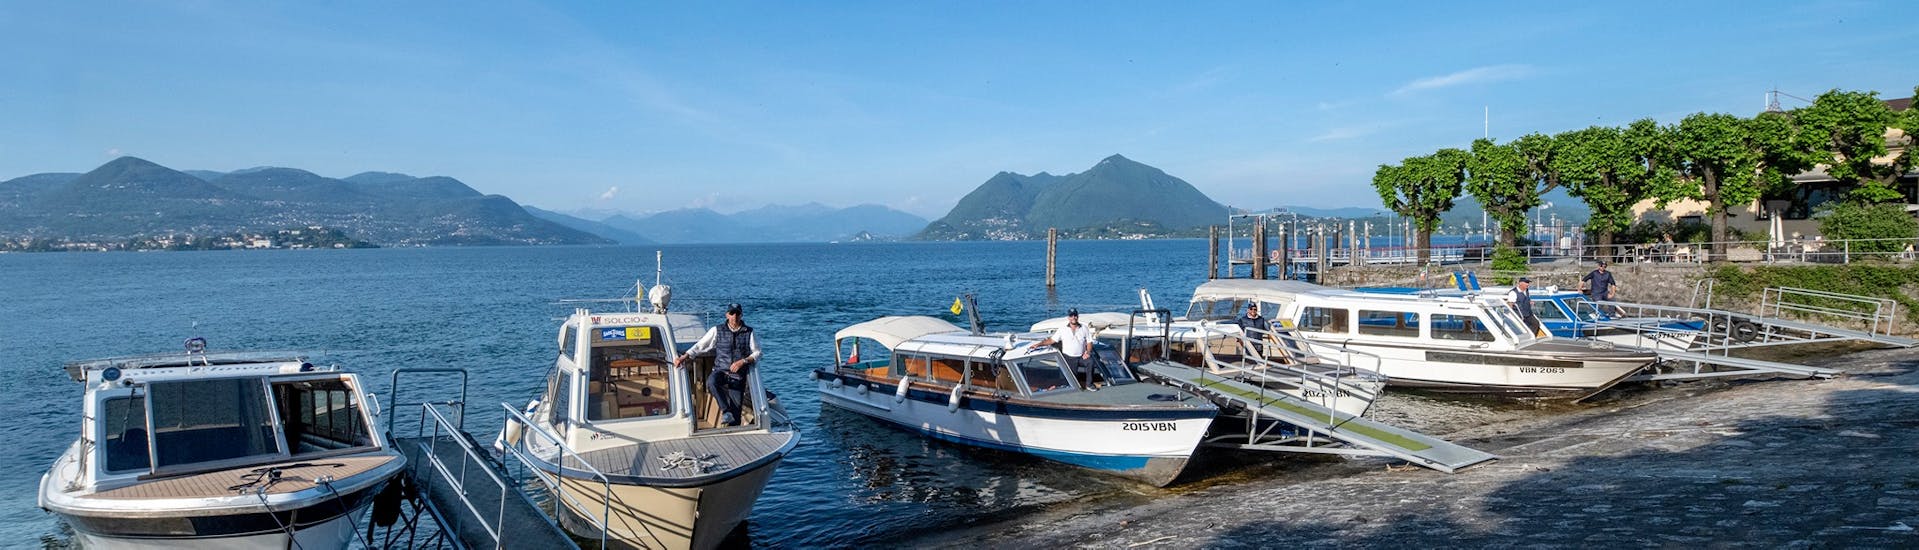 View of the boats used for Boat Transfer from Stresa to Isola Bella with Lake tours Stresa.